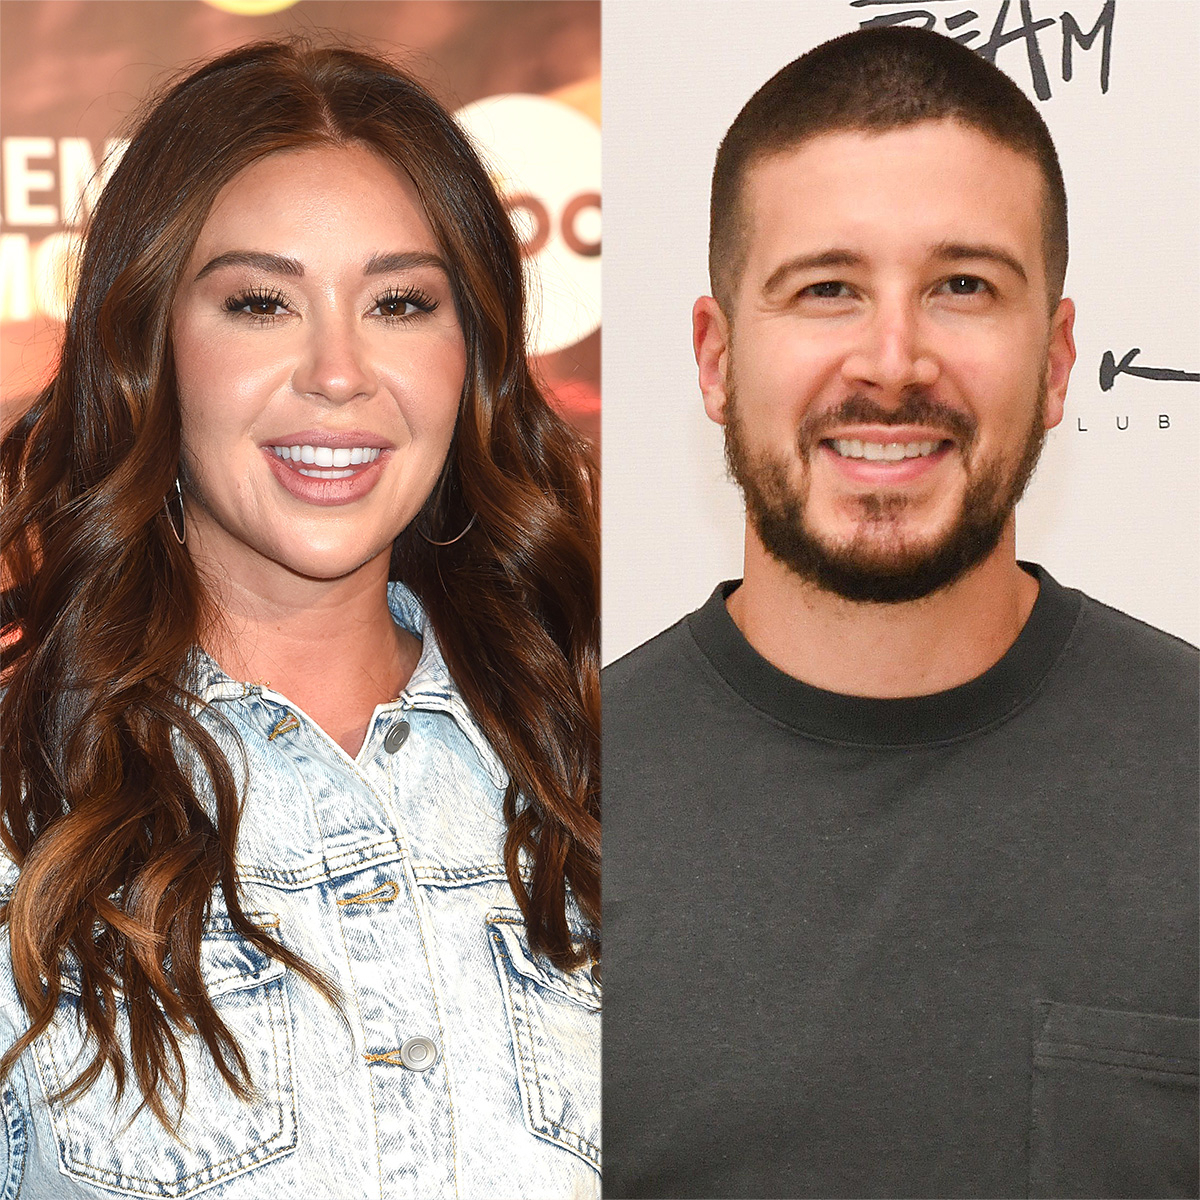 Gabby Windey Explains Why the “Door Is Open” to Dating Vinny Guadagnino Now – E! Online